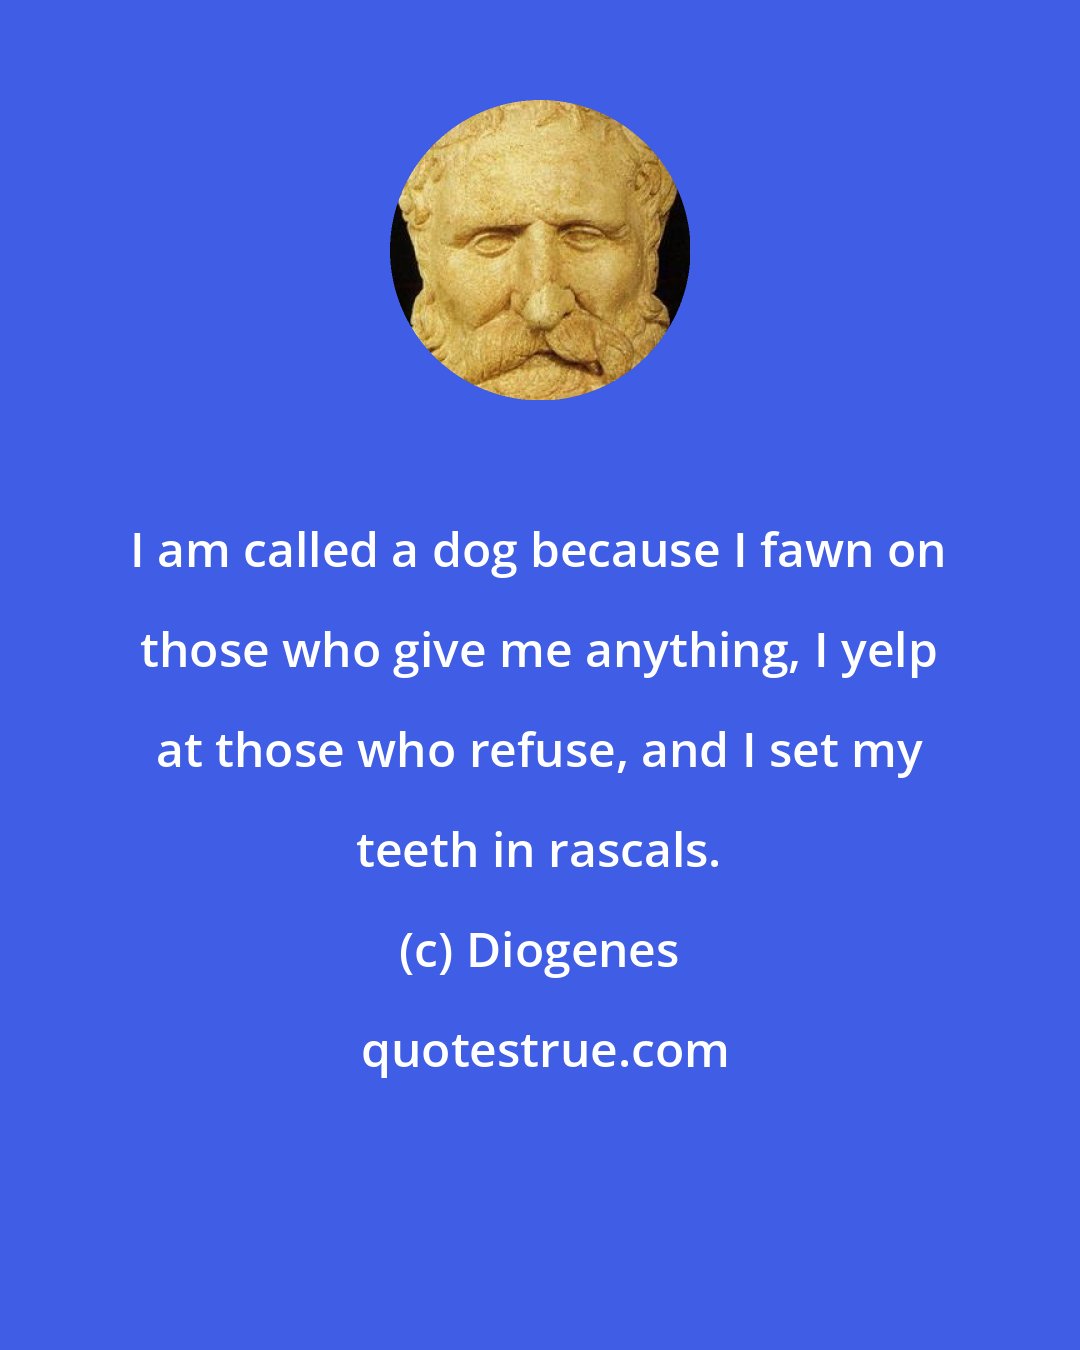 Diogenes: I am called a dog because I fawn on those who give me anything, I yelp at those who refuse, and I set my teeth in rascals.